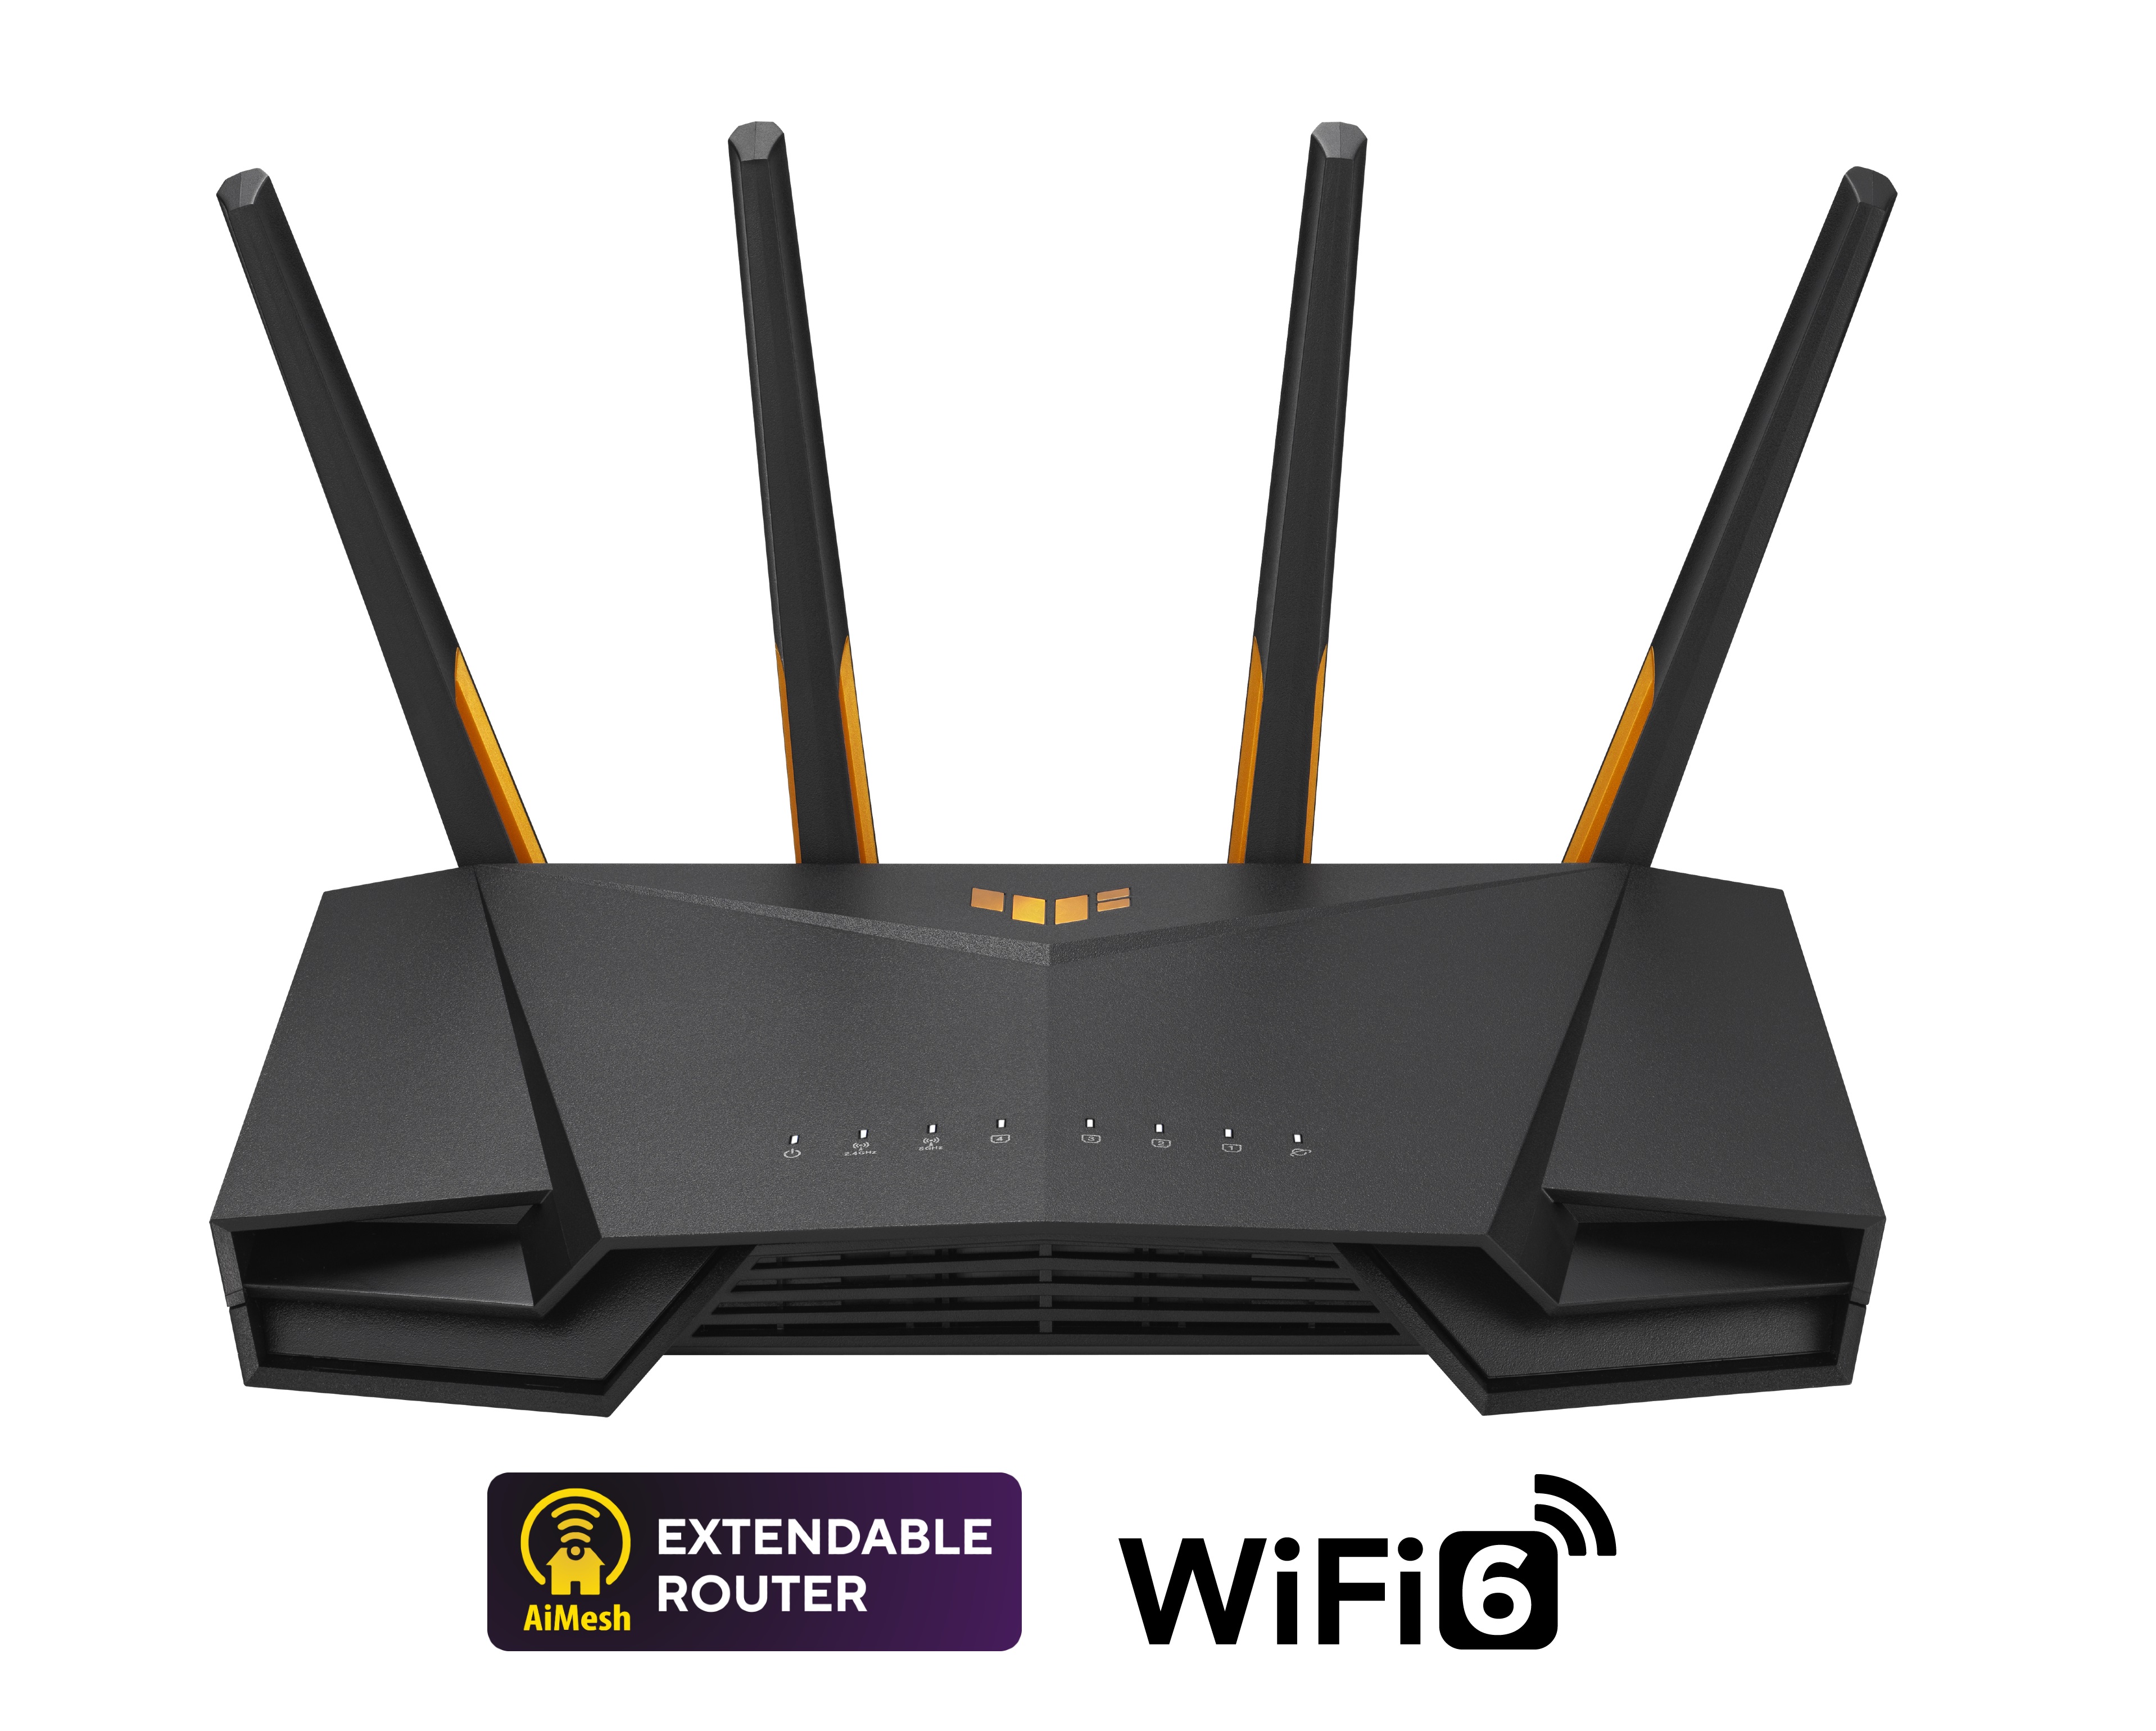 TUF-AX3000 V2 (AX3000) Wifi 6 Extendable Gaming router, 2,5G port, 4G/